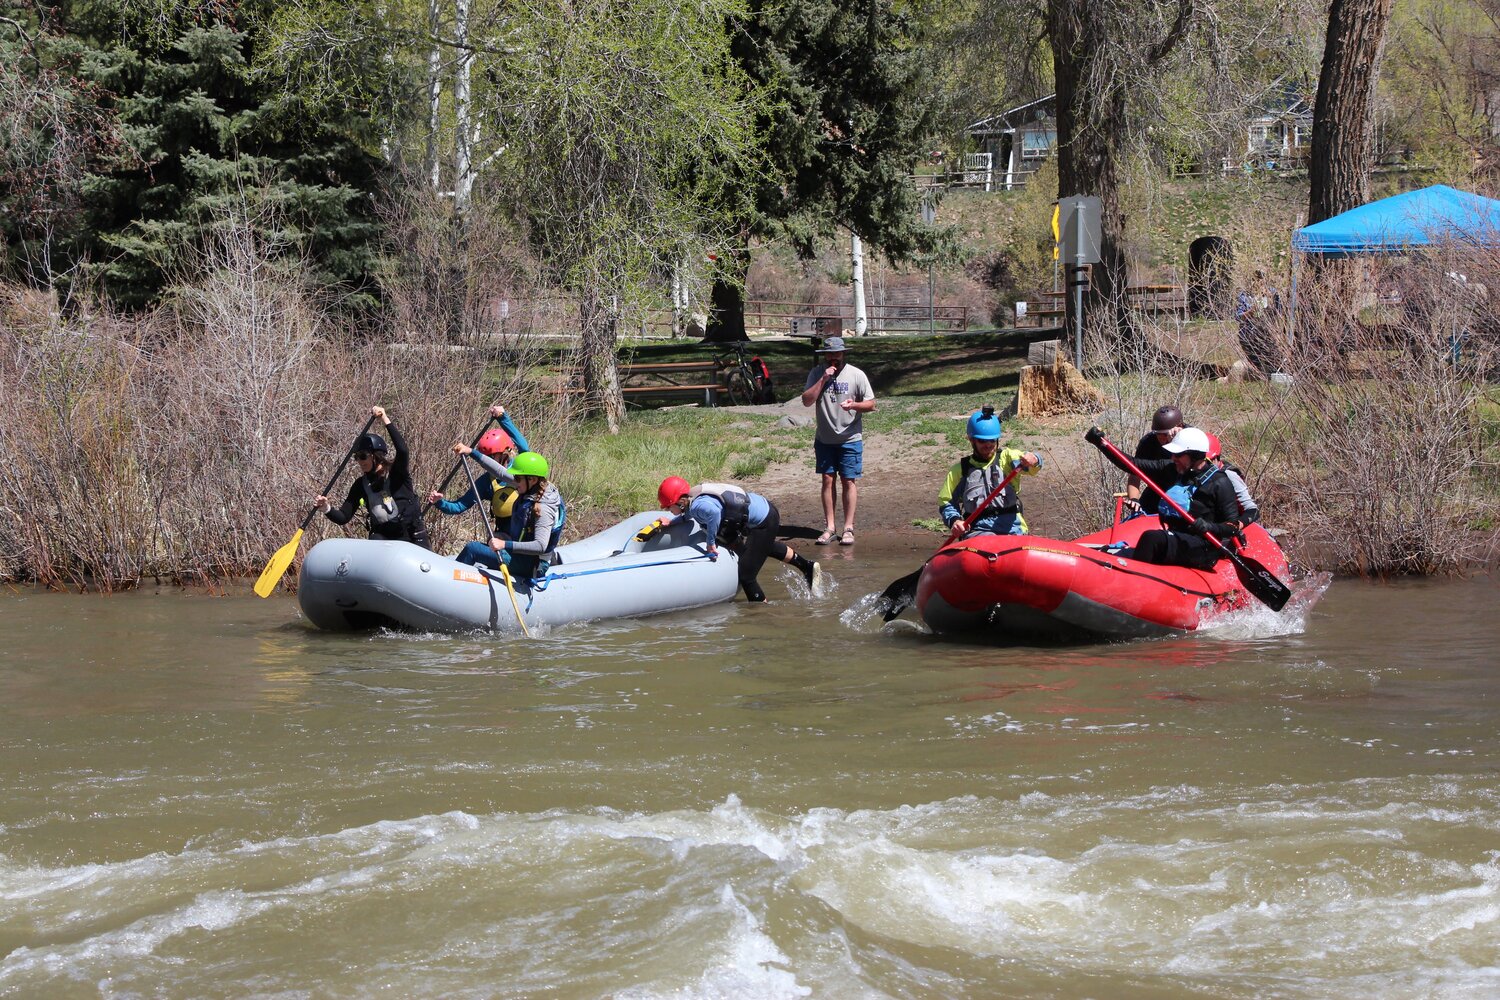 On May 11, the San Juan River will have a surge of boaters competing for cash and prizes during the annual Pagosa Paddle whitewater races. Races will begin at 9:30 a.m. and continue all day.